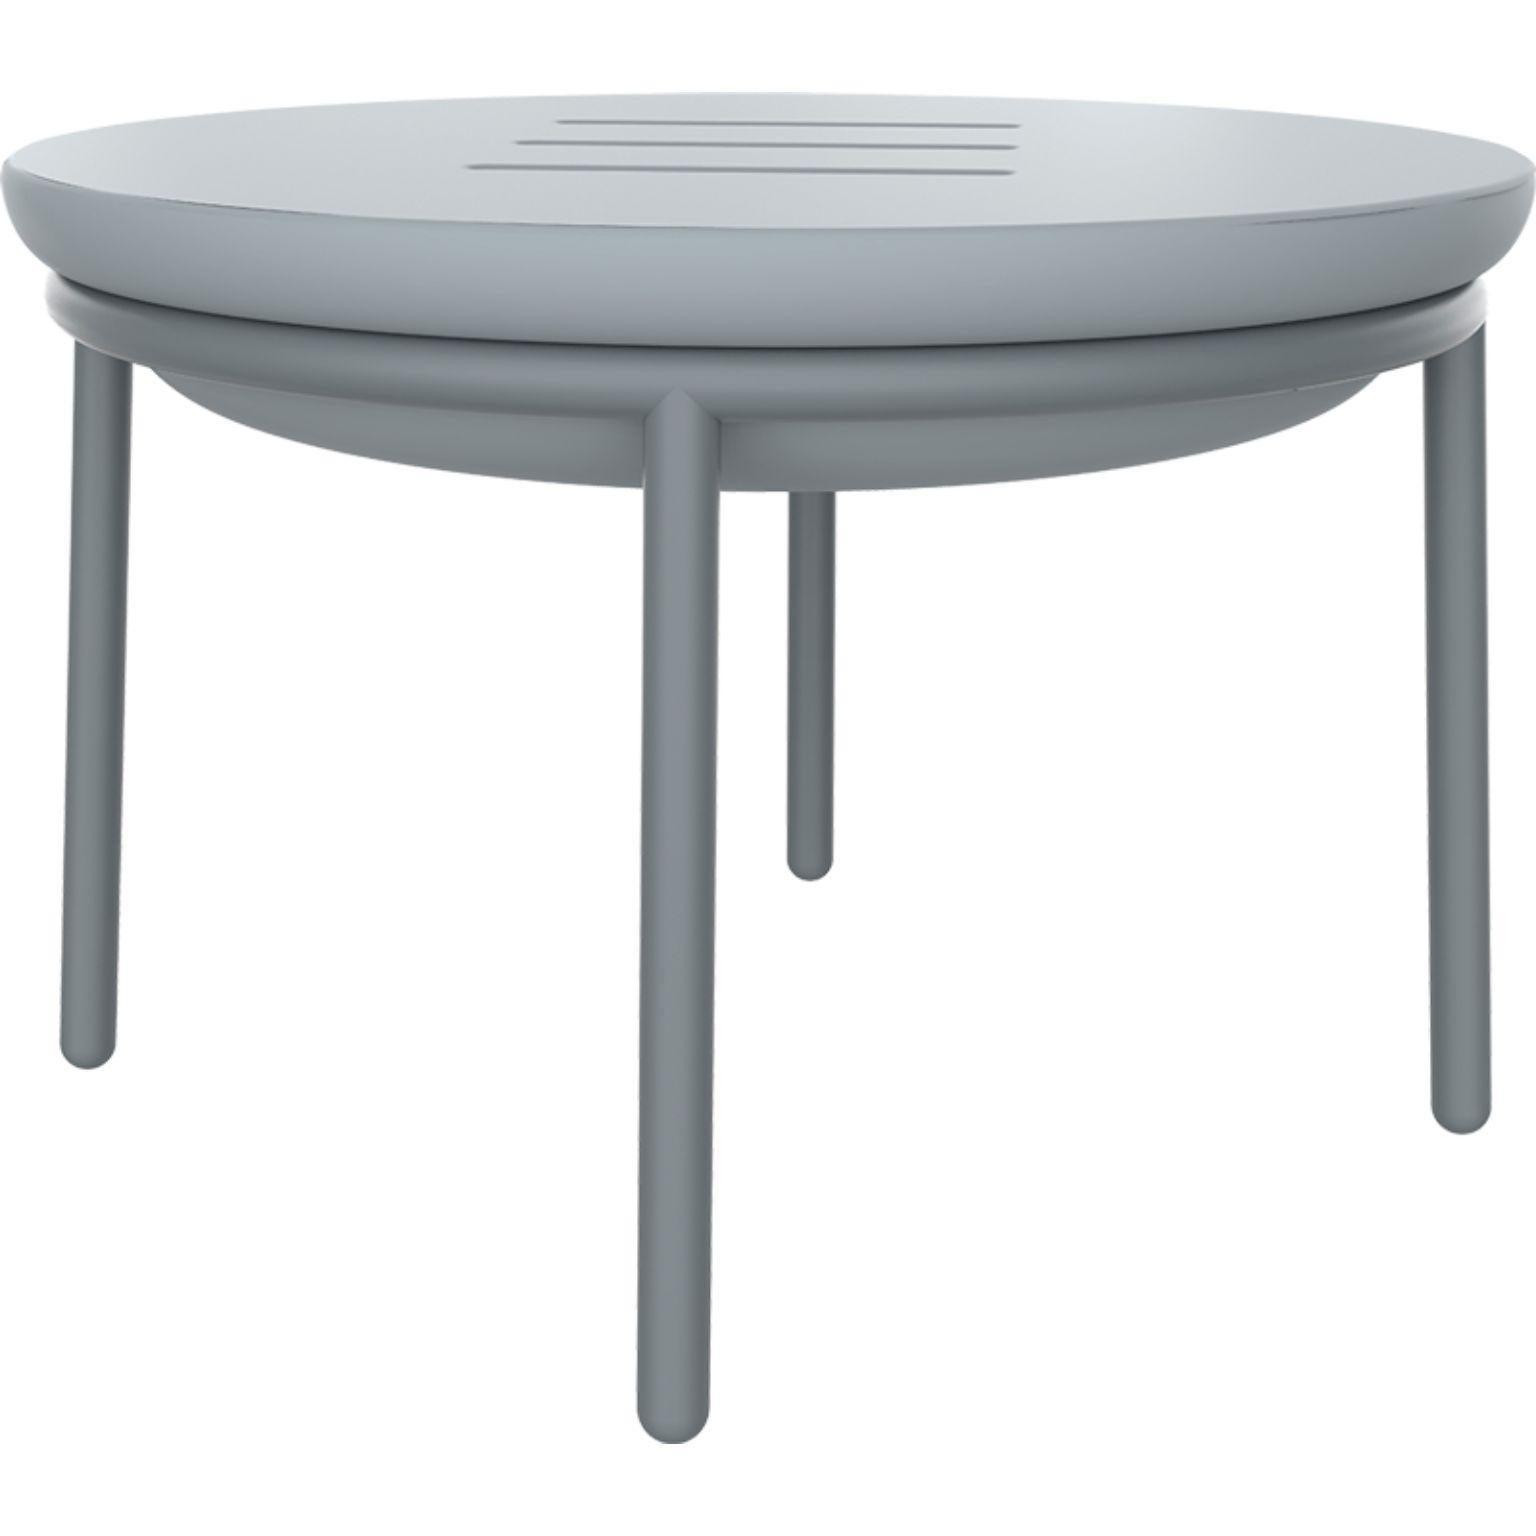 Stainless Steel Lace Cream 60 Low Table by Mowee